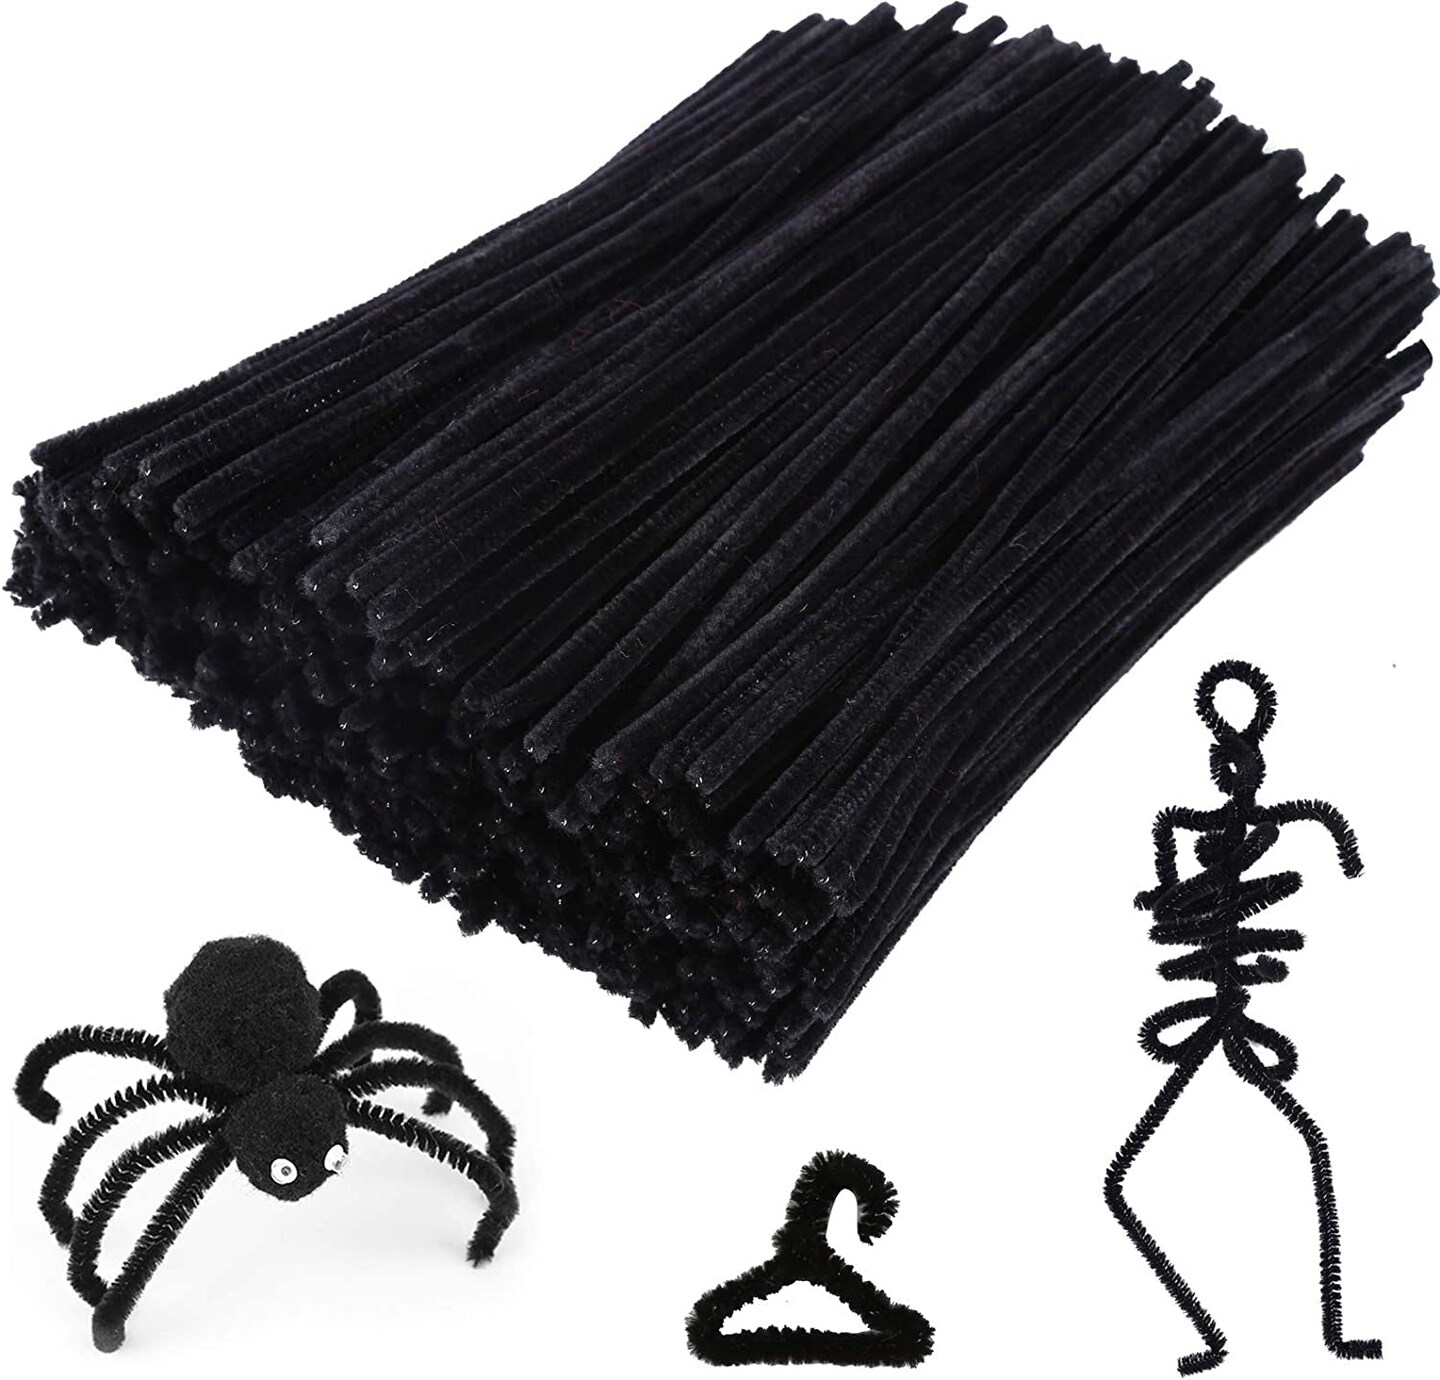 Chenille Stems, Pipe Cleaners, Arts & Crafts